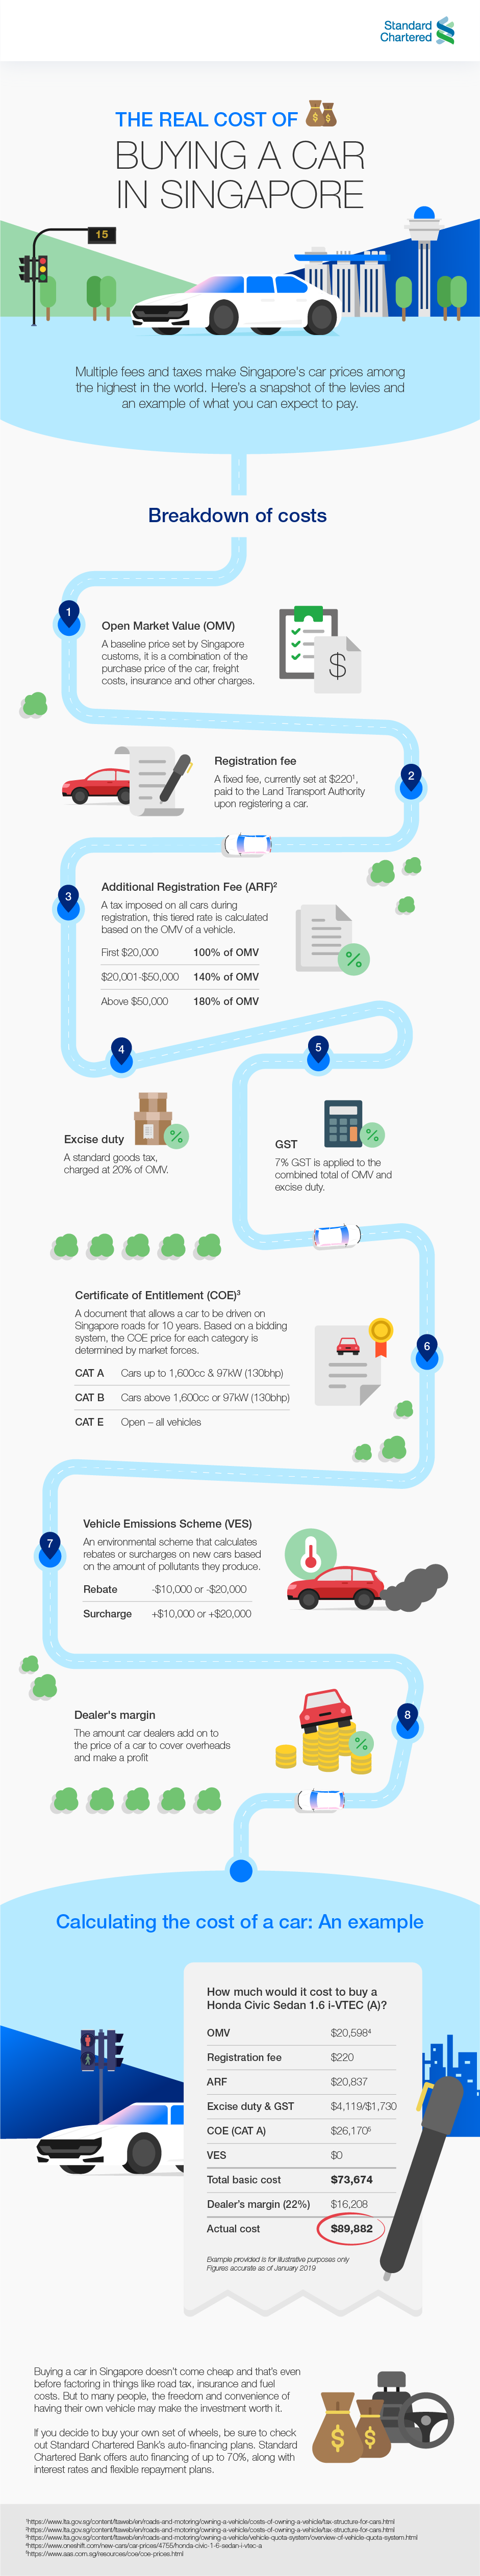 buying-a-car-in-singapore-infographic